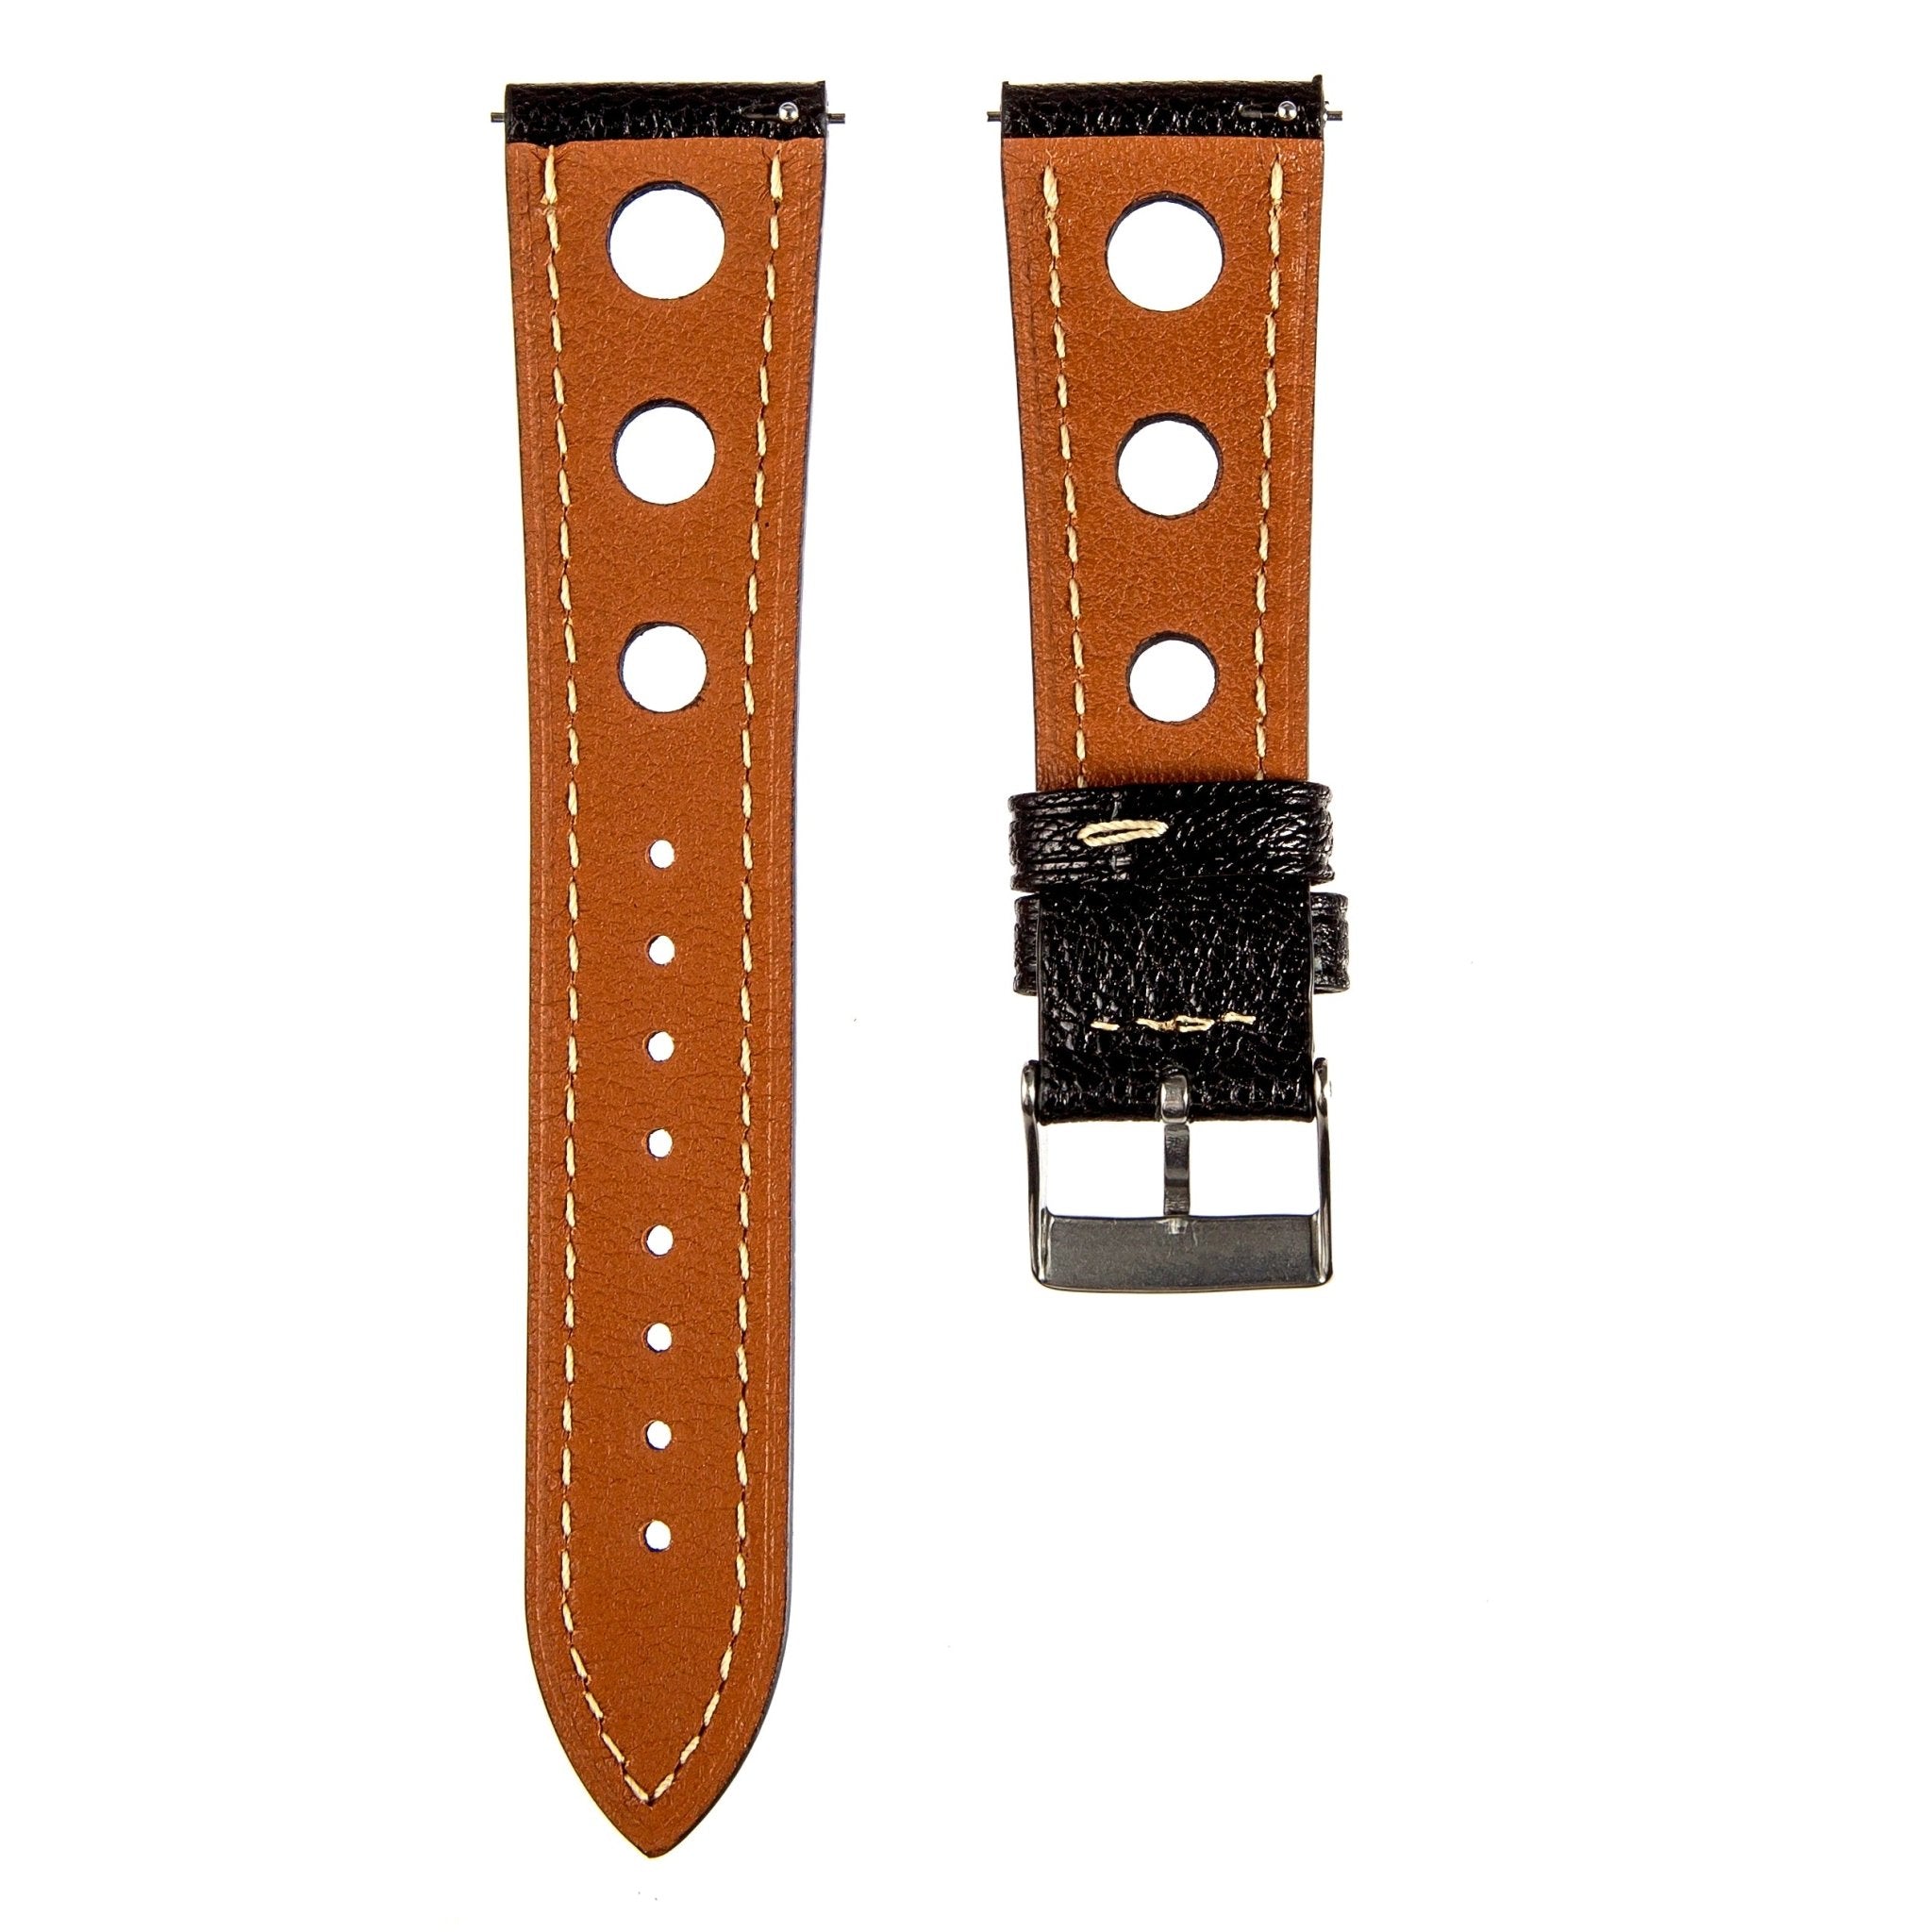 Sully Chevre Rally Leather Strap - Quick-Release - Black (2429) -StrapSeeker